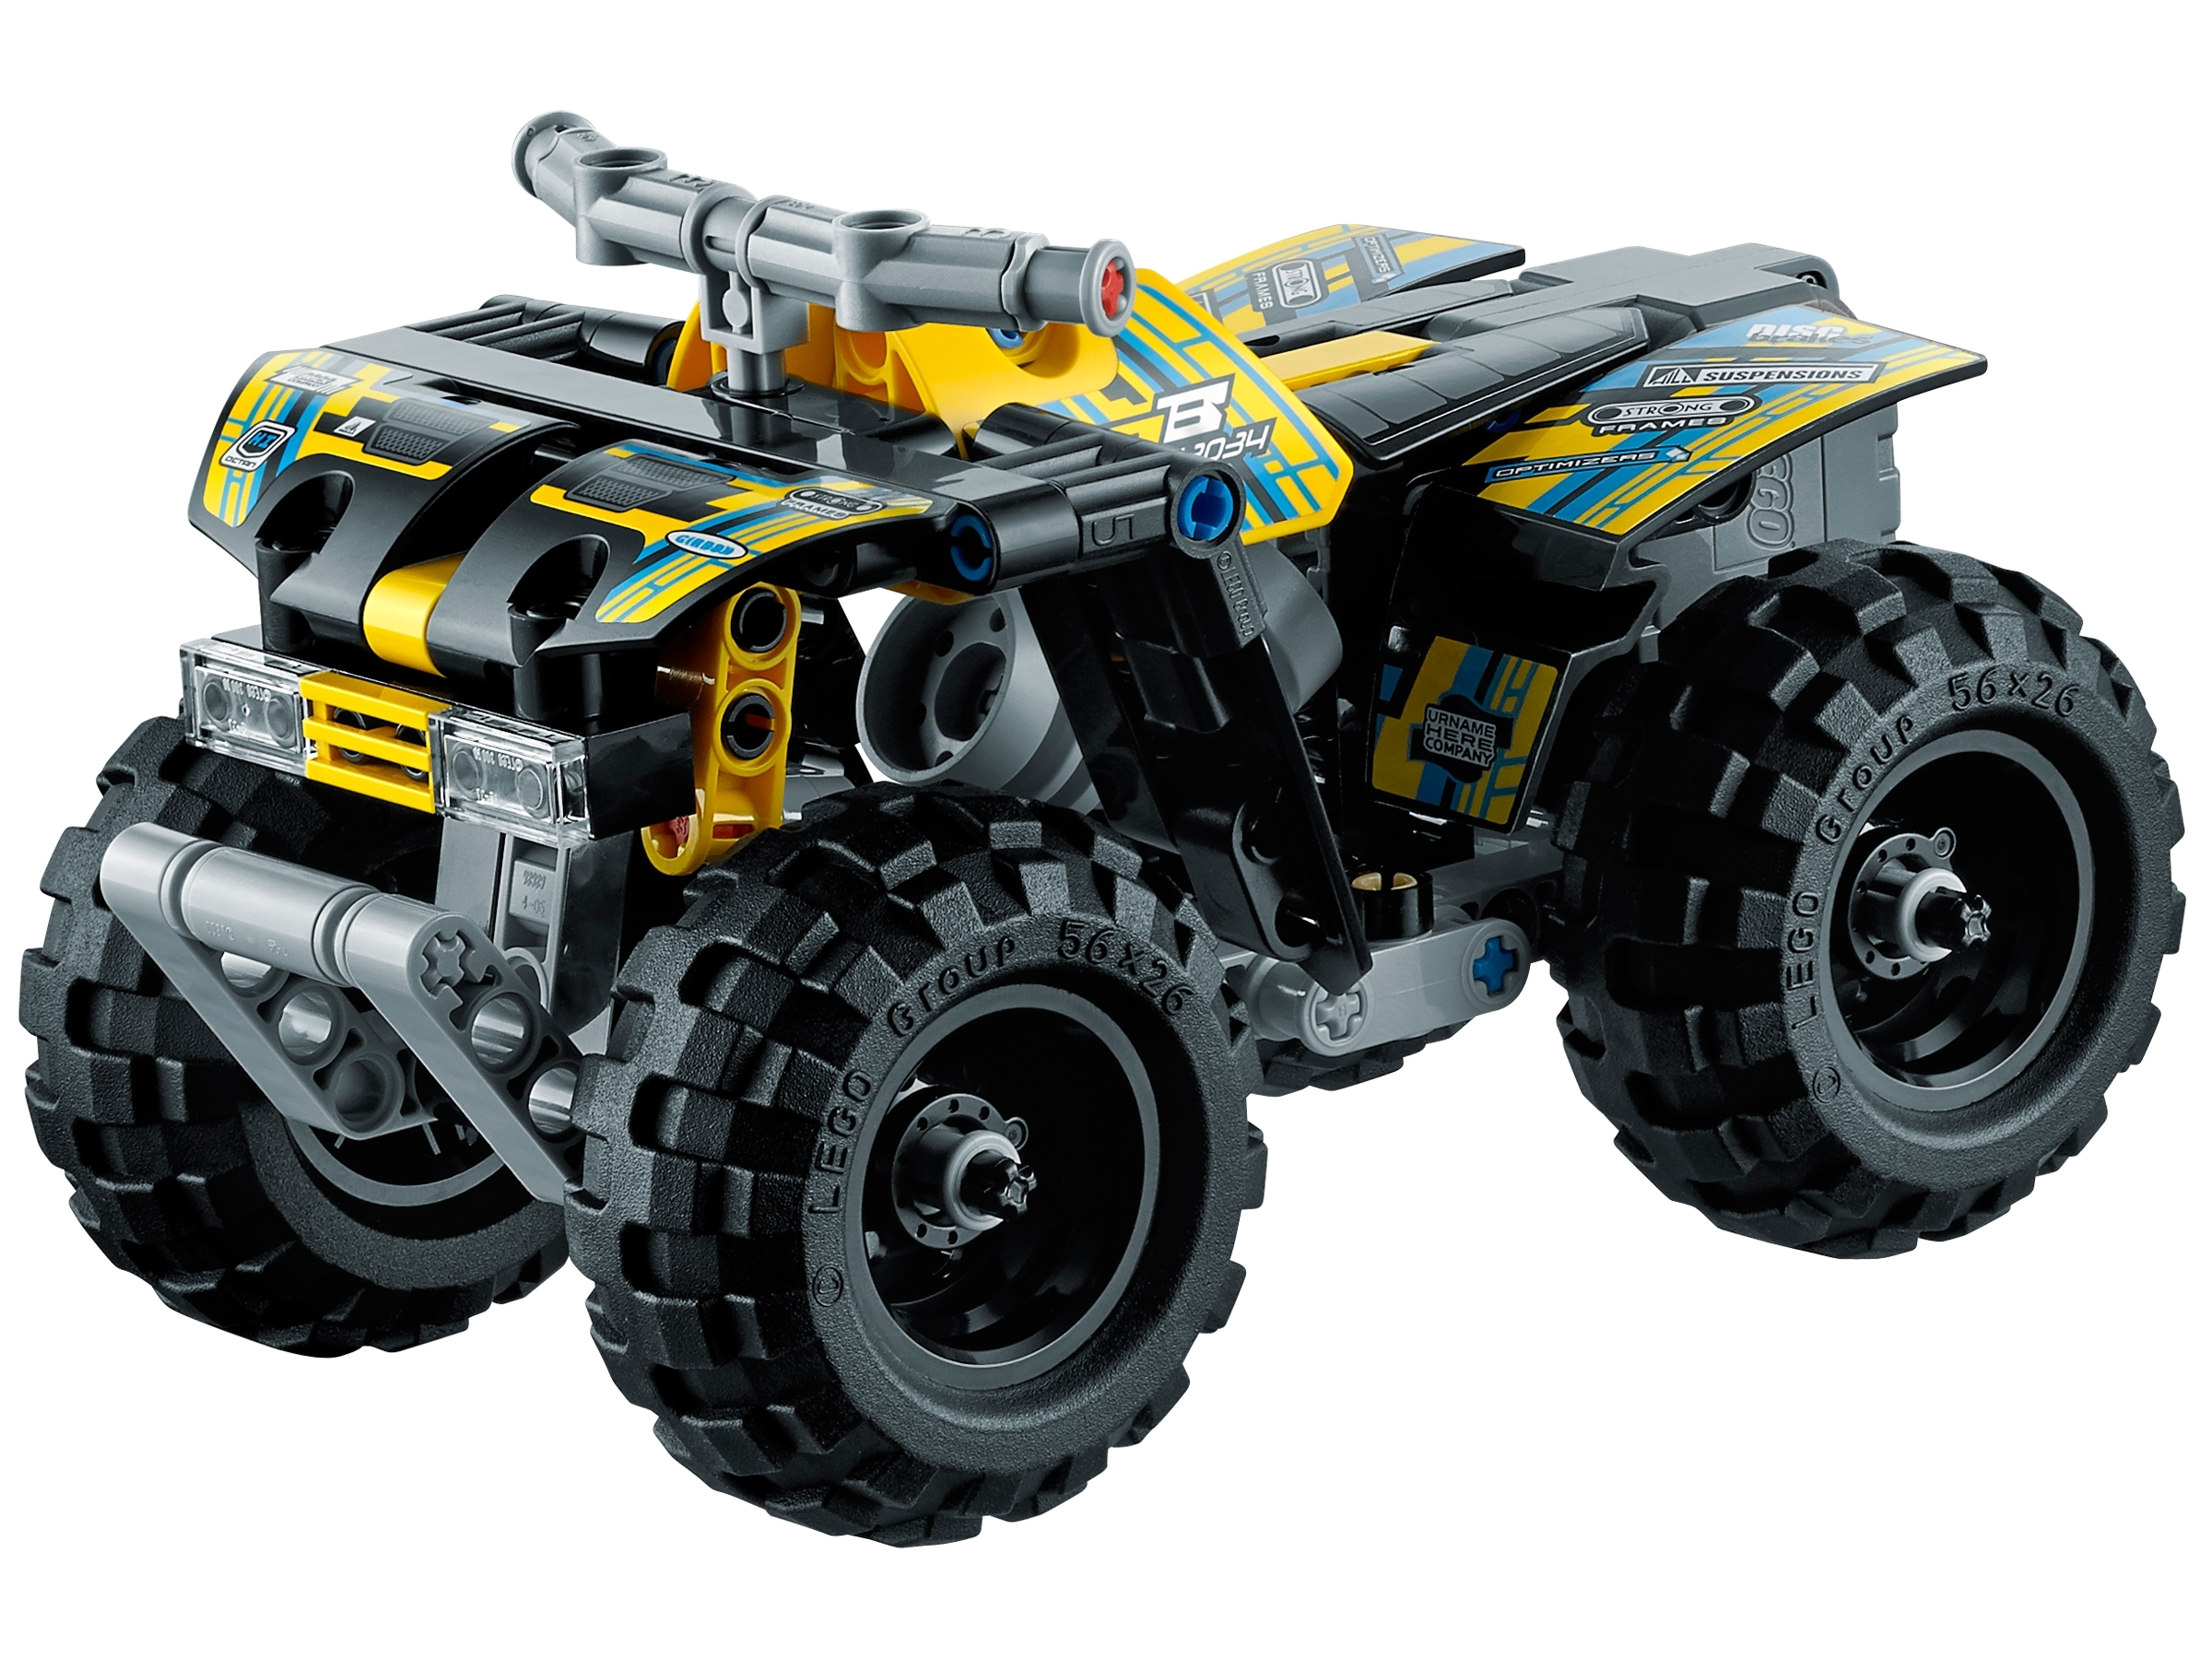 Quad Bike 42034 | Technic™ | Buy online at the Official LEGO® Shop US